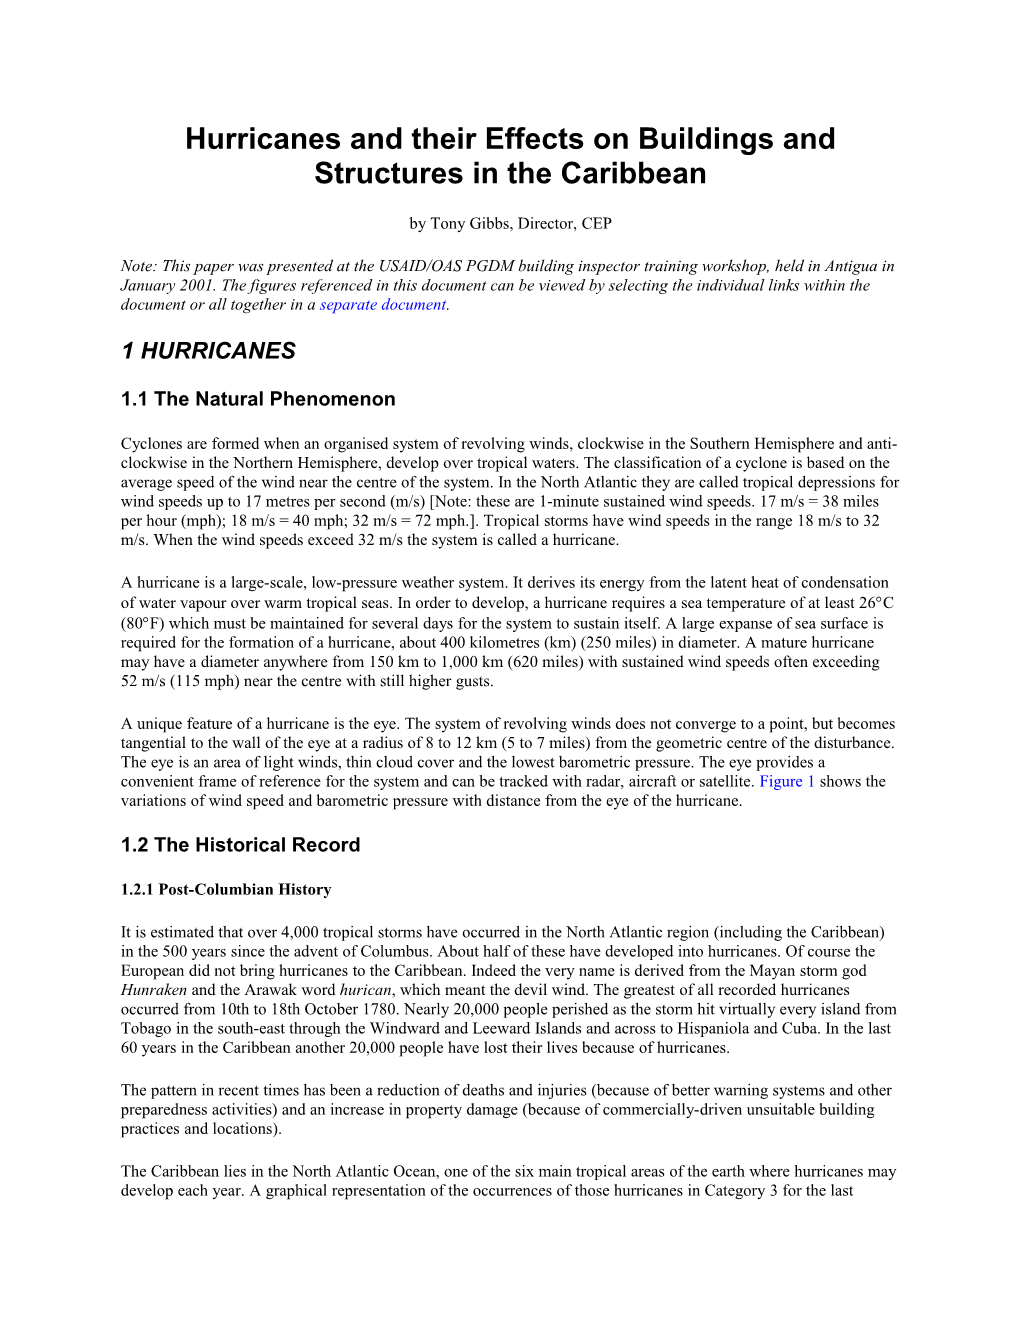 Hurricanes and Their Effects on Buildings and Structures in the Caribbean